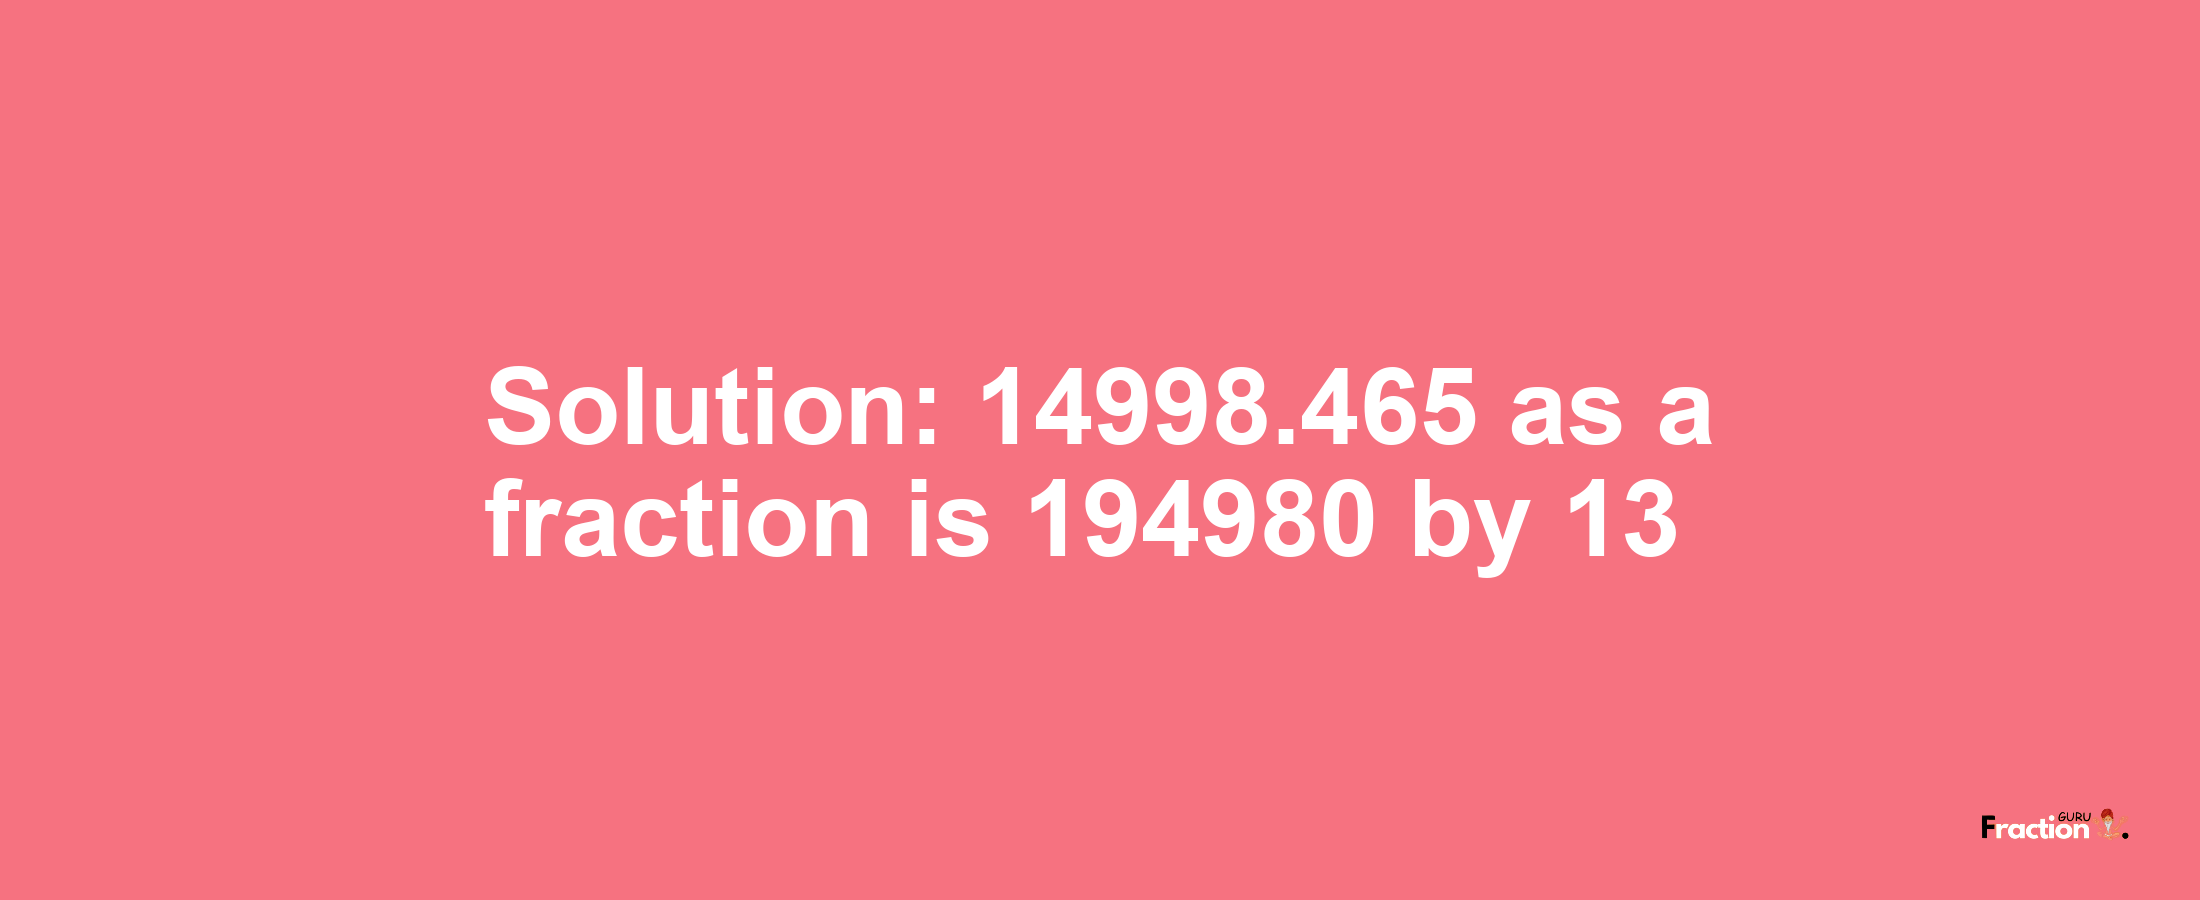 Solution:14998.465 as a fraction is 194980/13